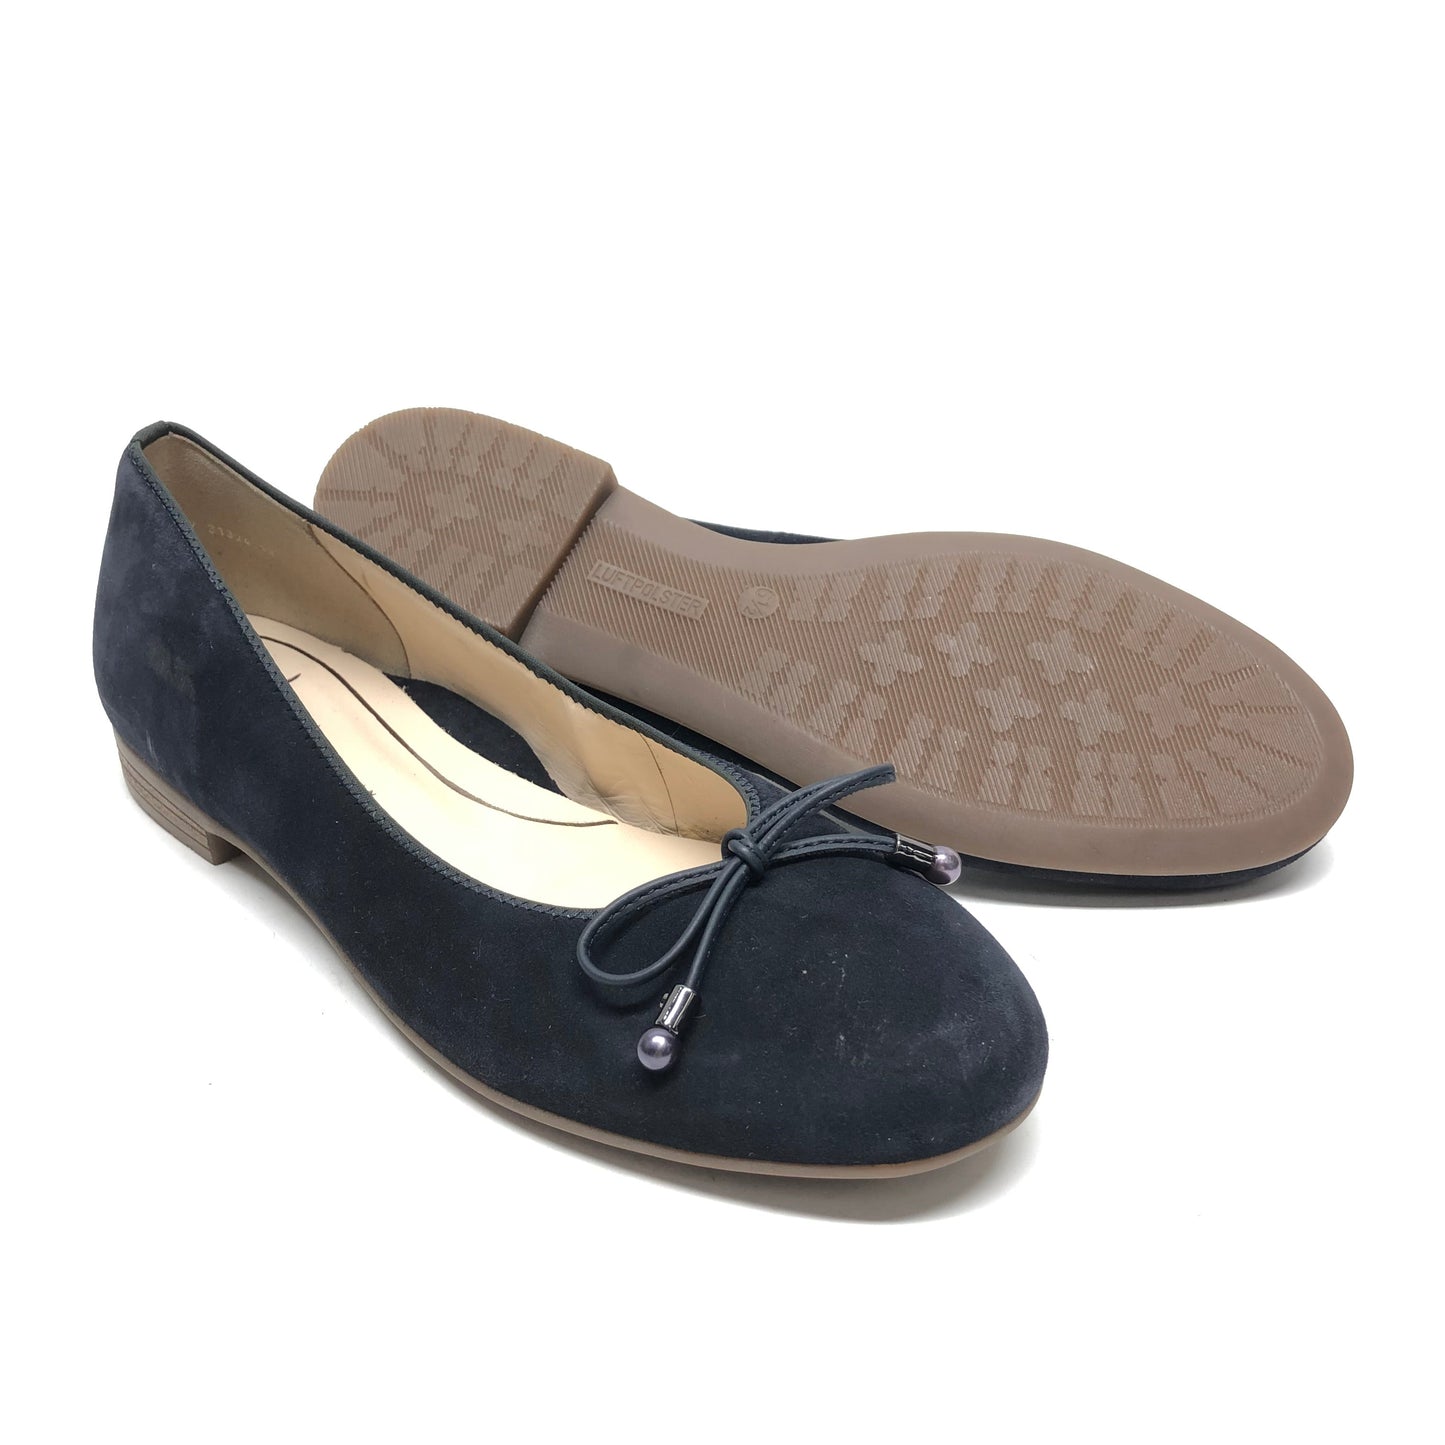 Shoes Flats By Cmc  Size: 9